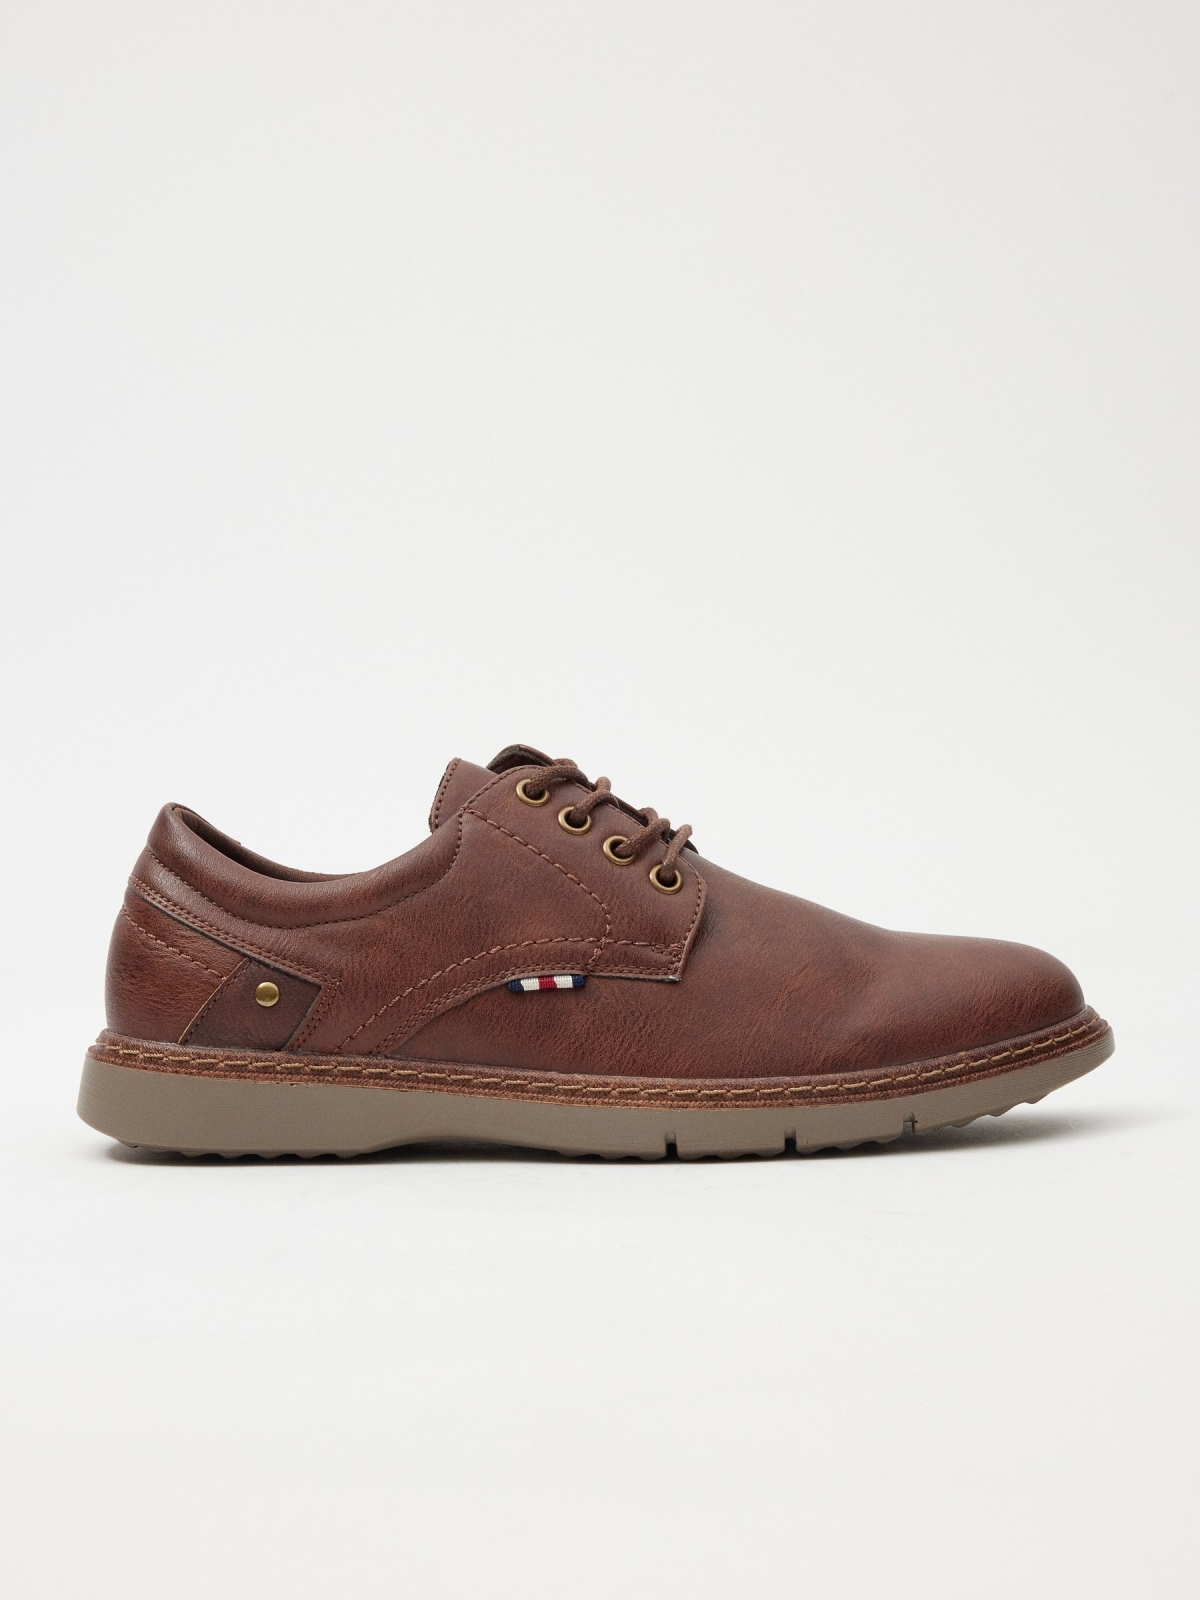 Classic leatherette shoe with laces